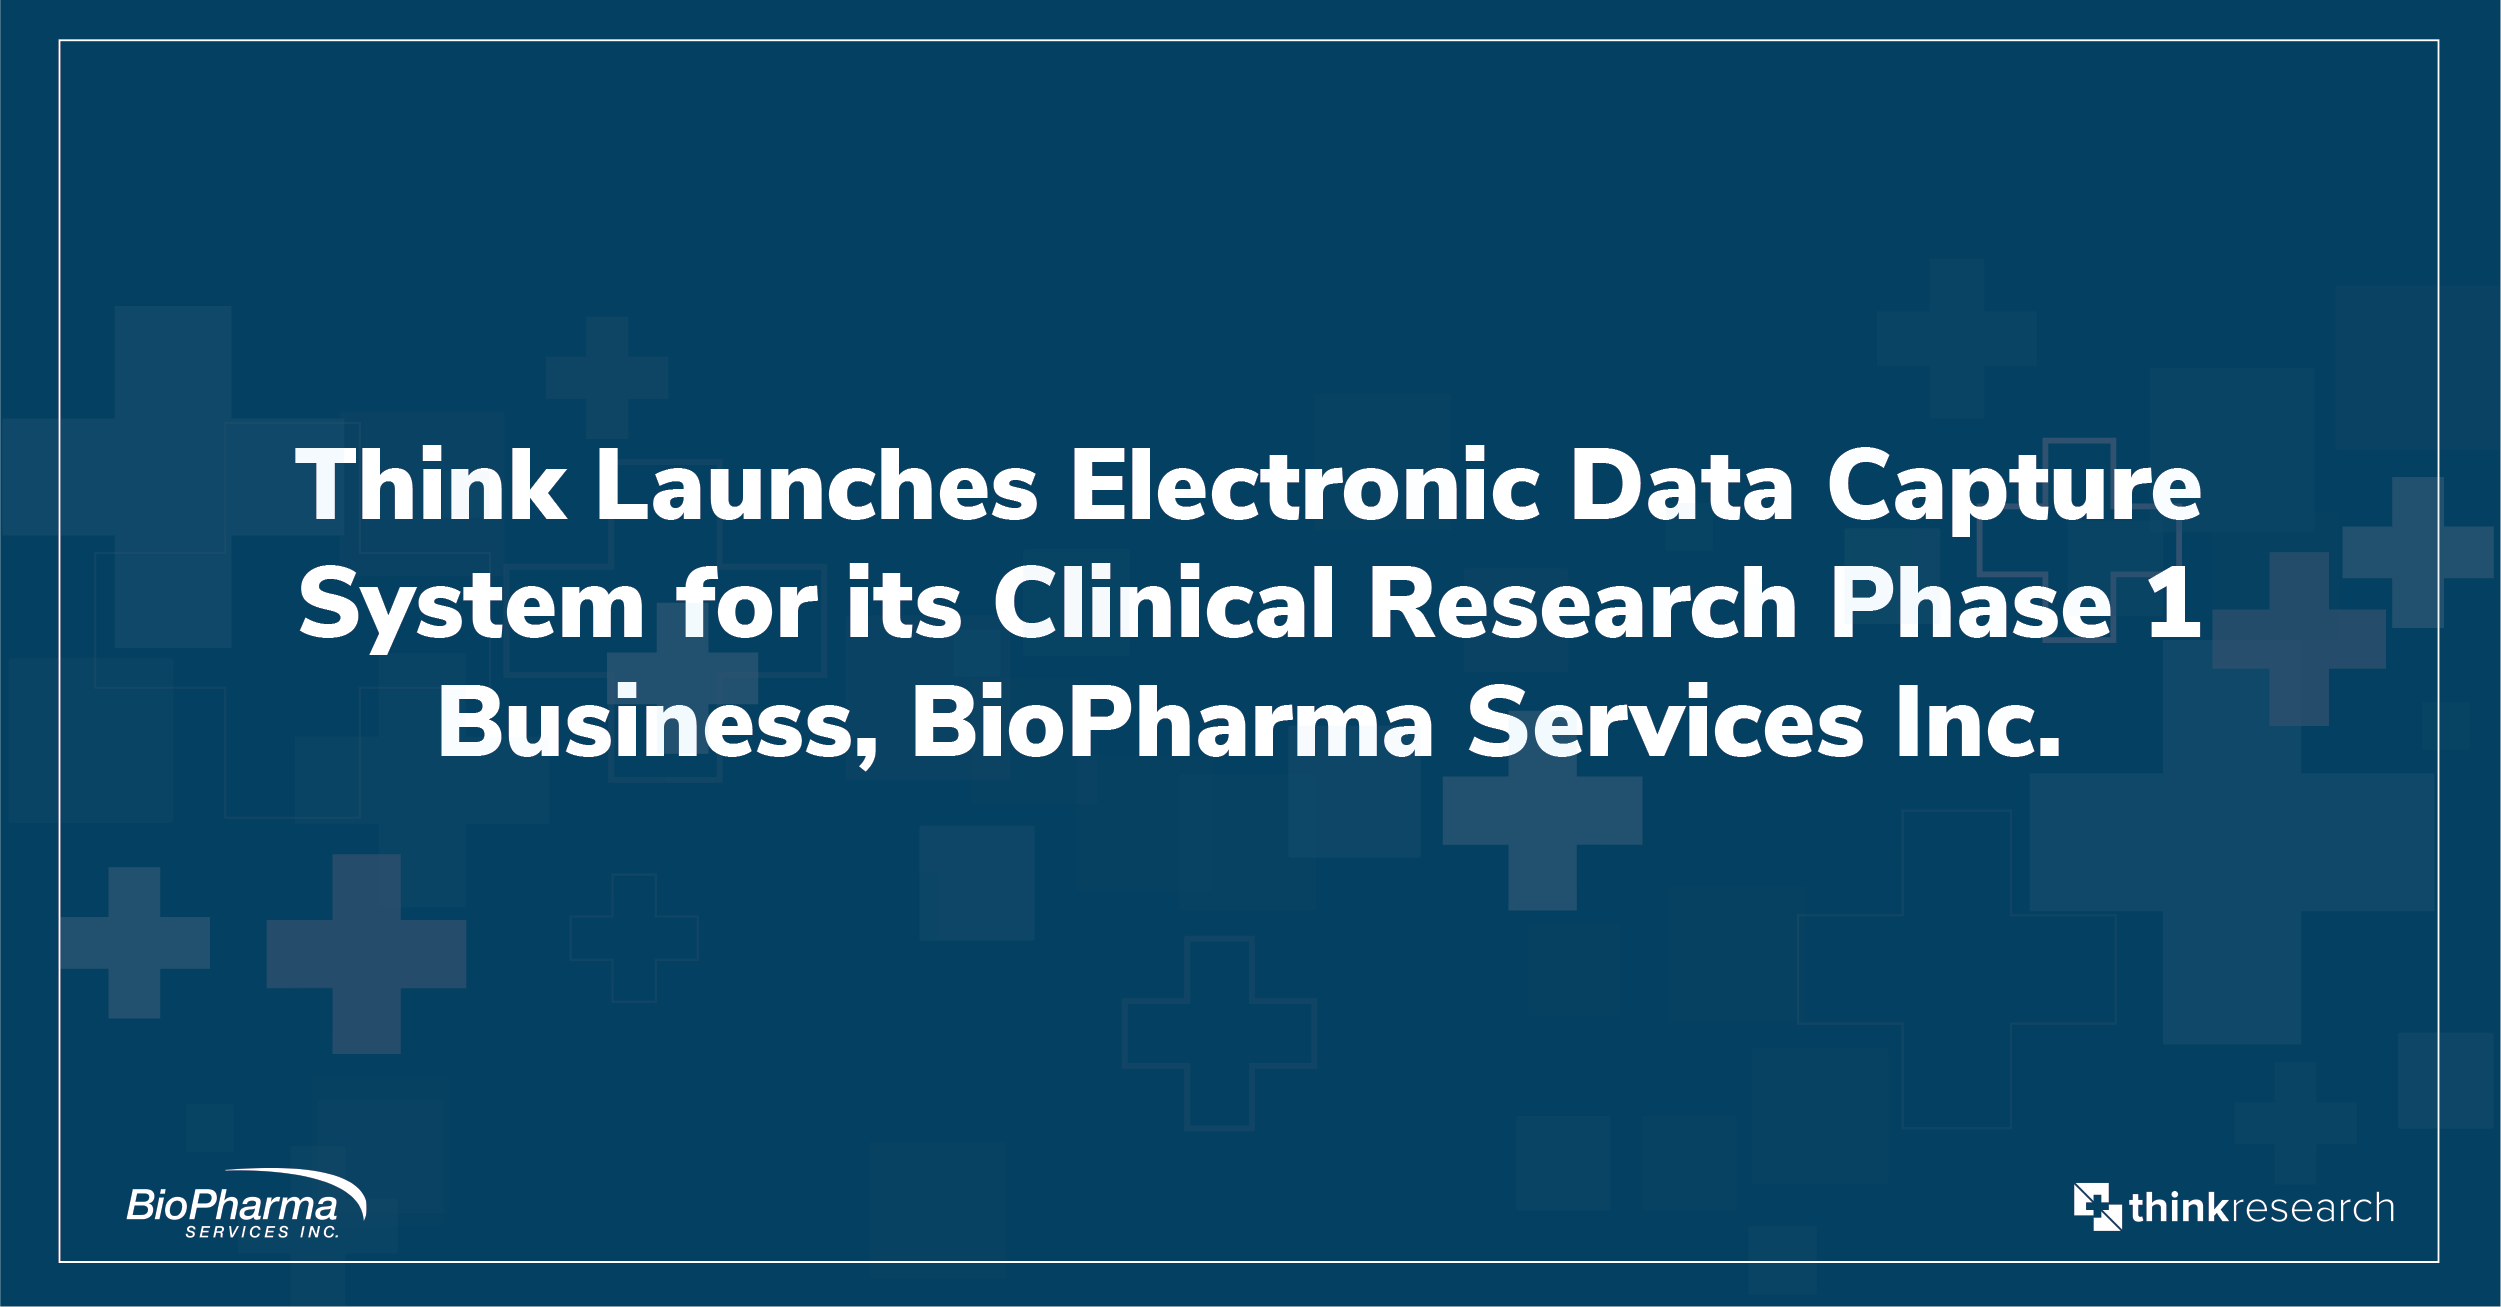 BioPharma’s parent company Think Research progresses the digitization of Phase 1 clinical trials